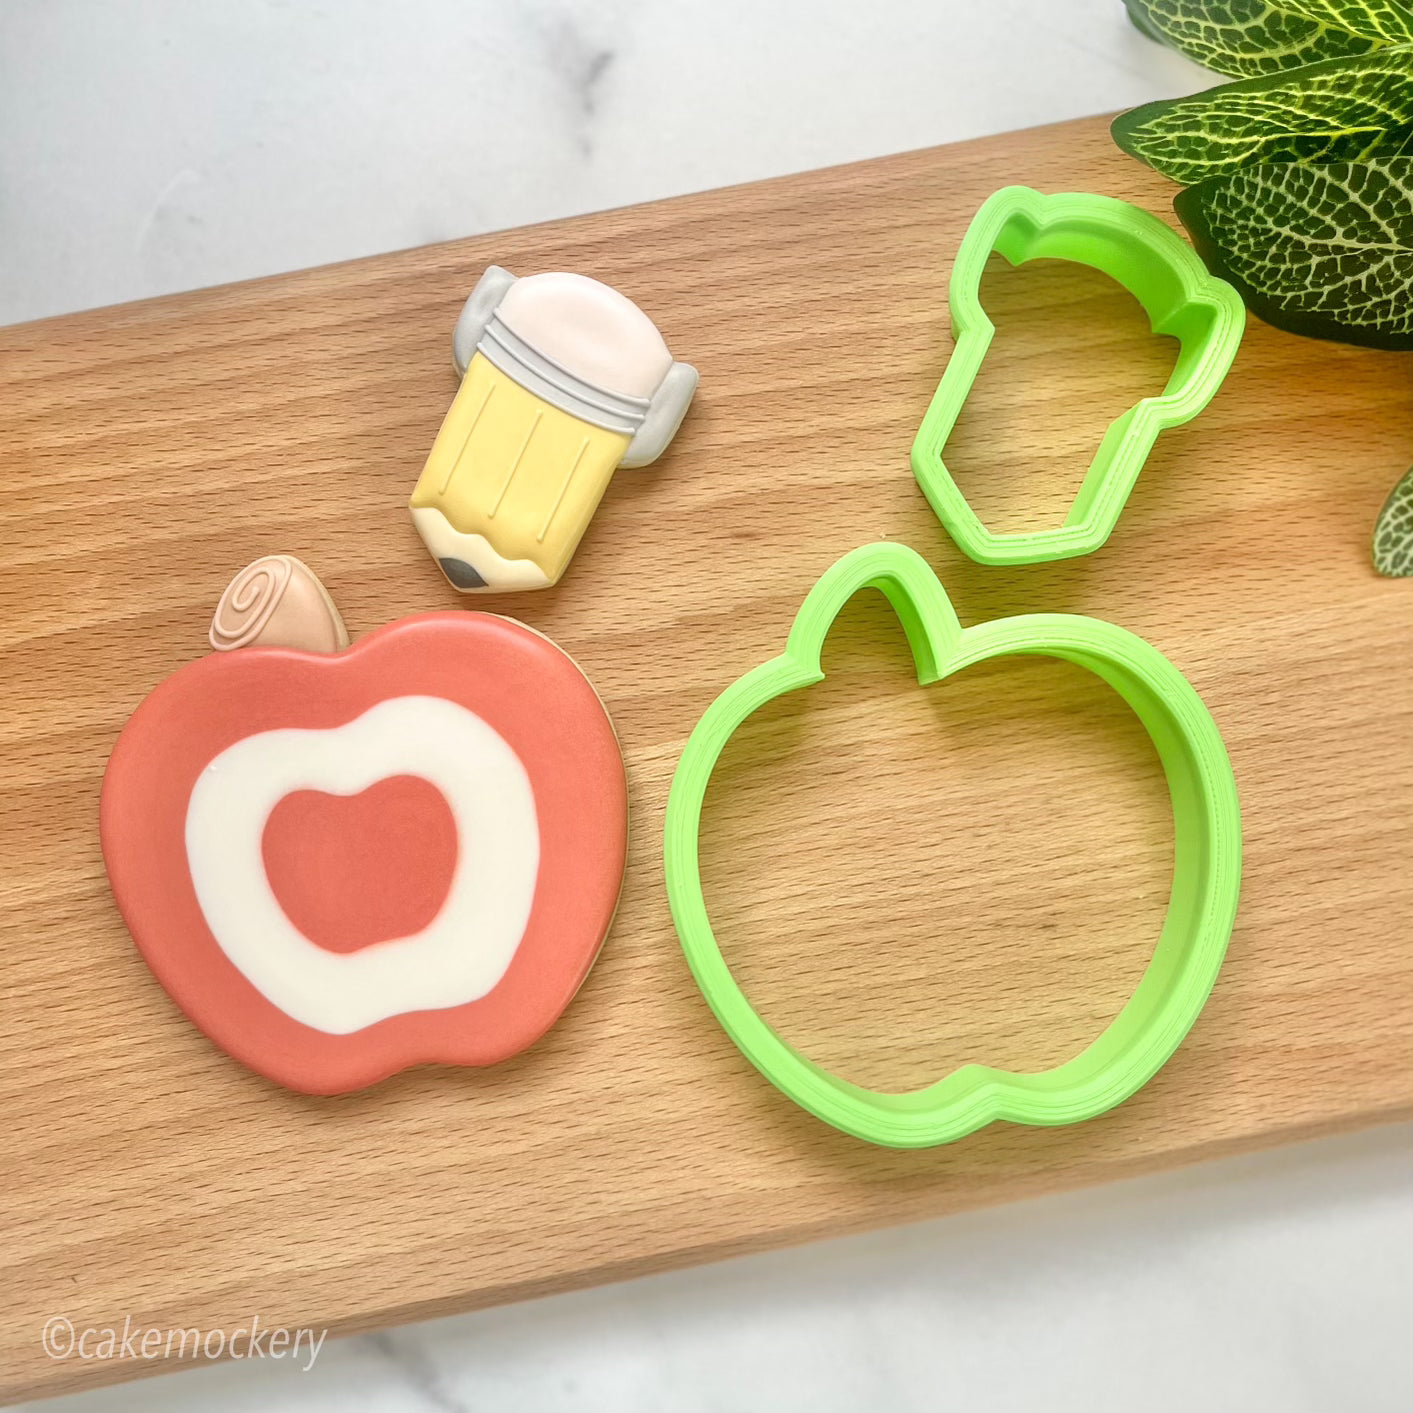 Target Pencil Set of 2 Cookie Cutters